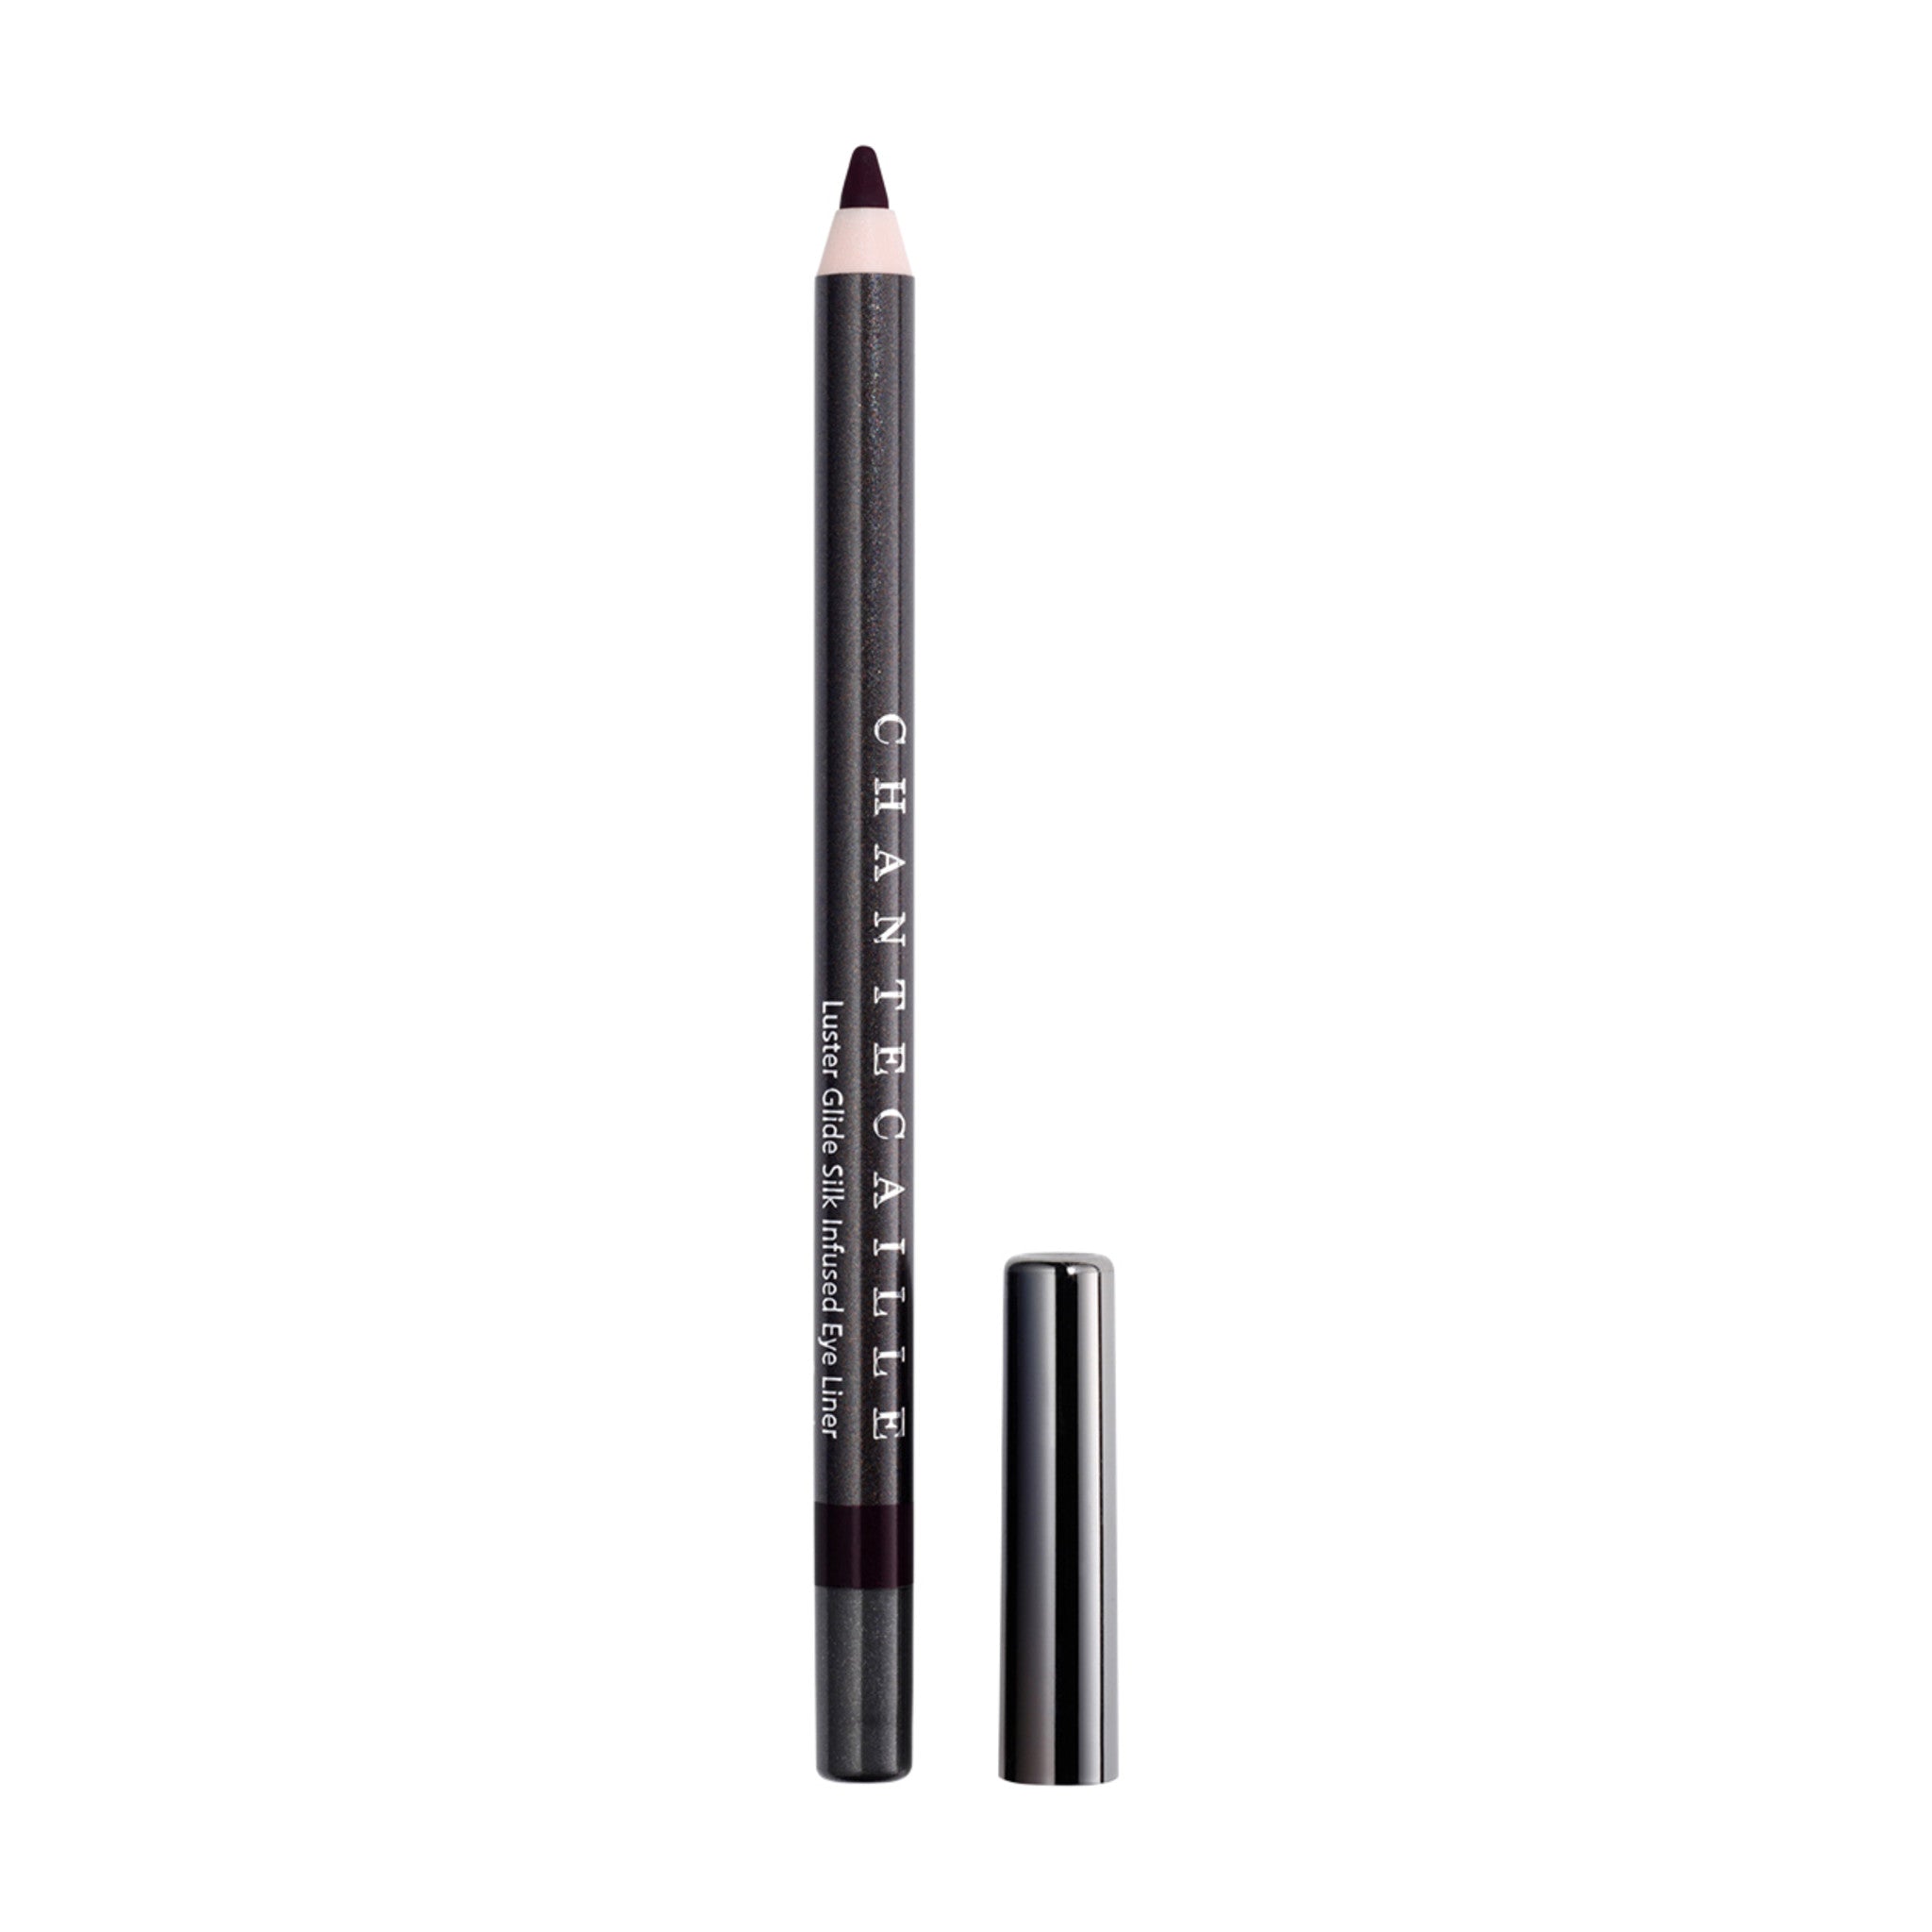 Chantecaille Luster Glide Silk Infused Eye Liner Color/Shade variant: Silk Raven main image. This product is in the color black